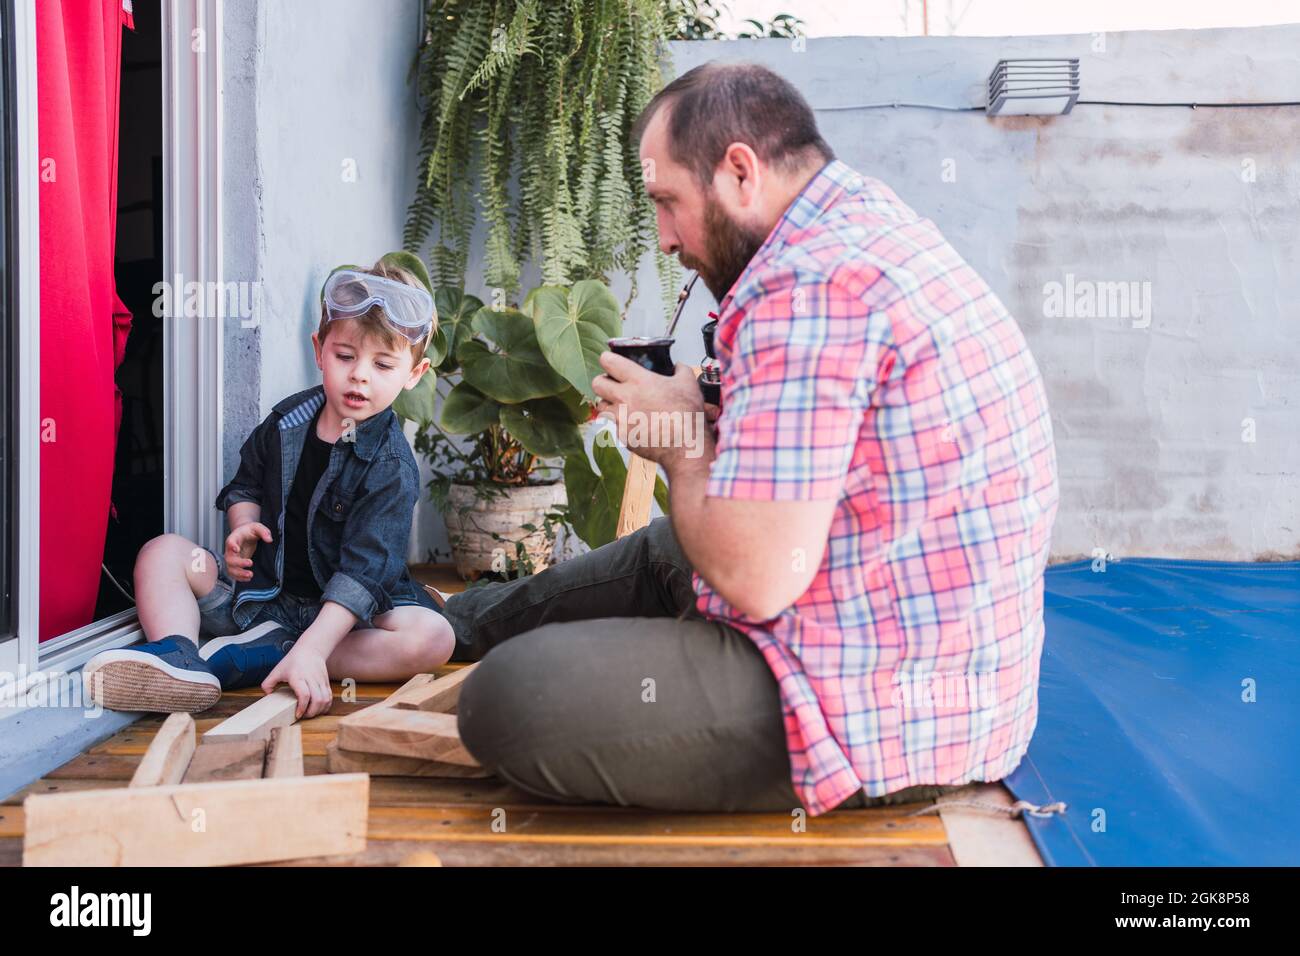 https://c8.alamy.com/comp/2GK8P58/hipster-dad-drinking-herbal-tea-from-calabash-gourd-against-son-working-with-wood-2GK8P58.jpg